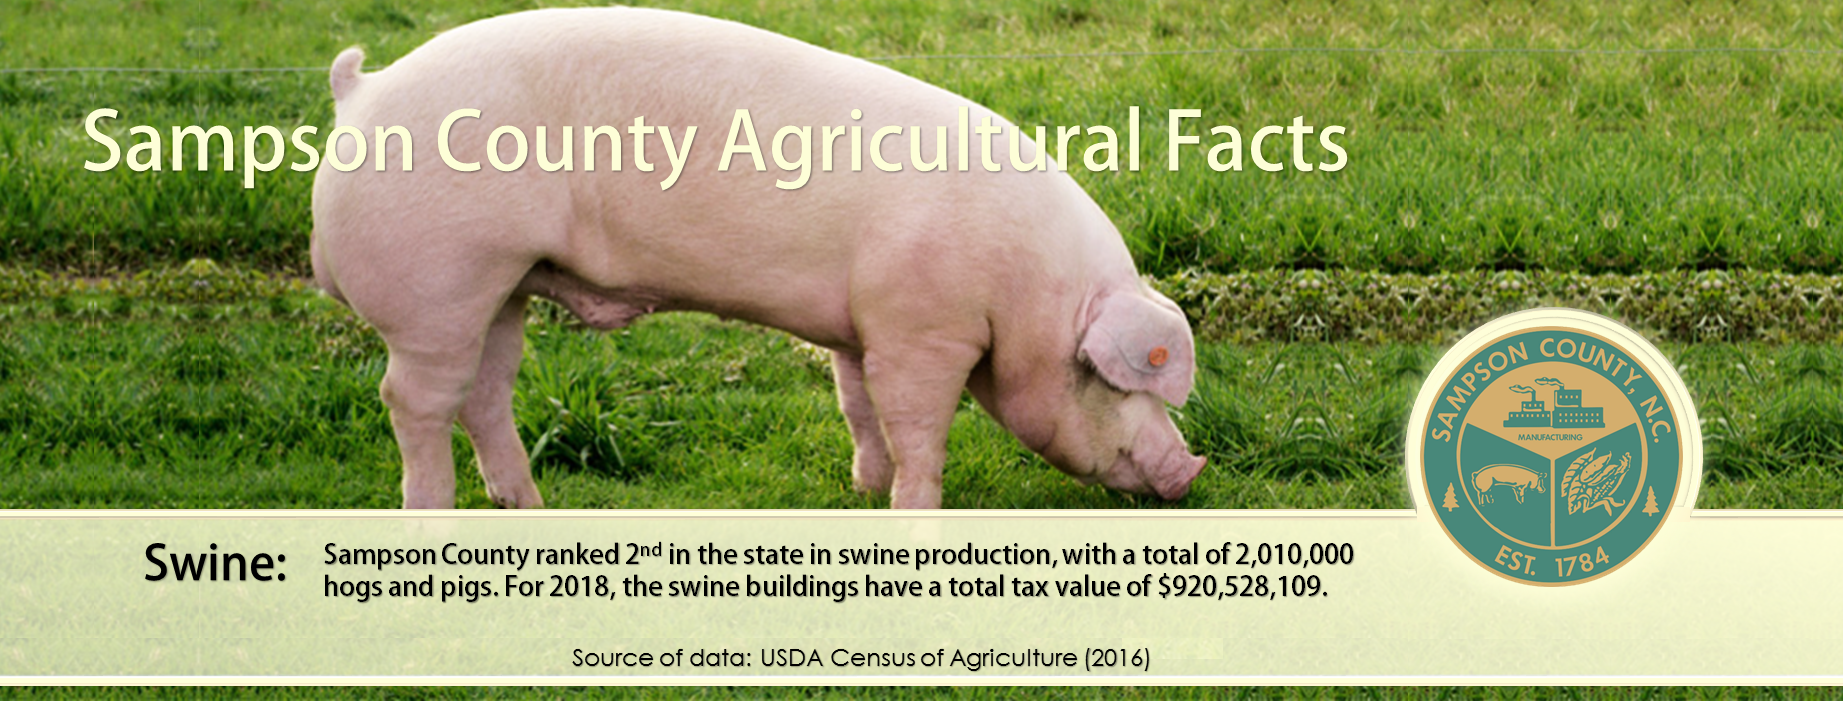 sampson county agricultural facts - hogs and pigs